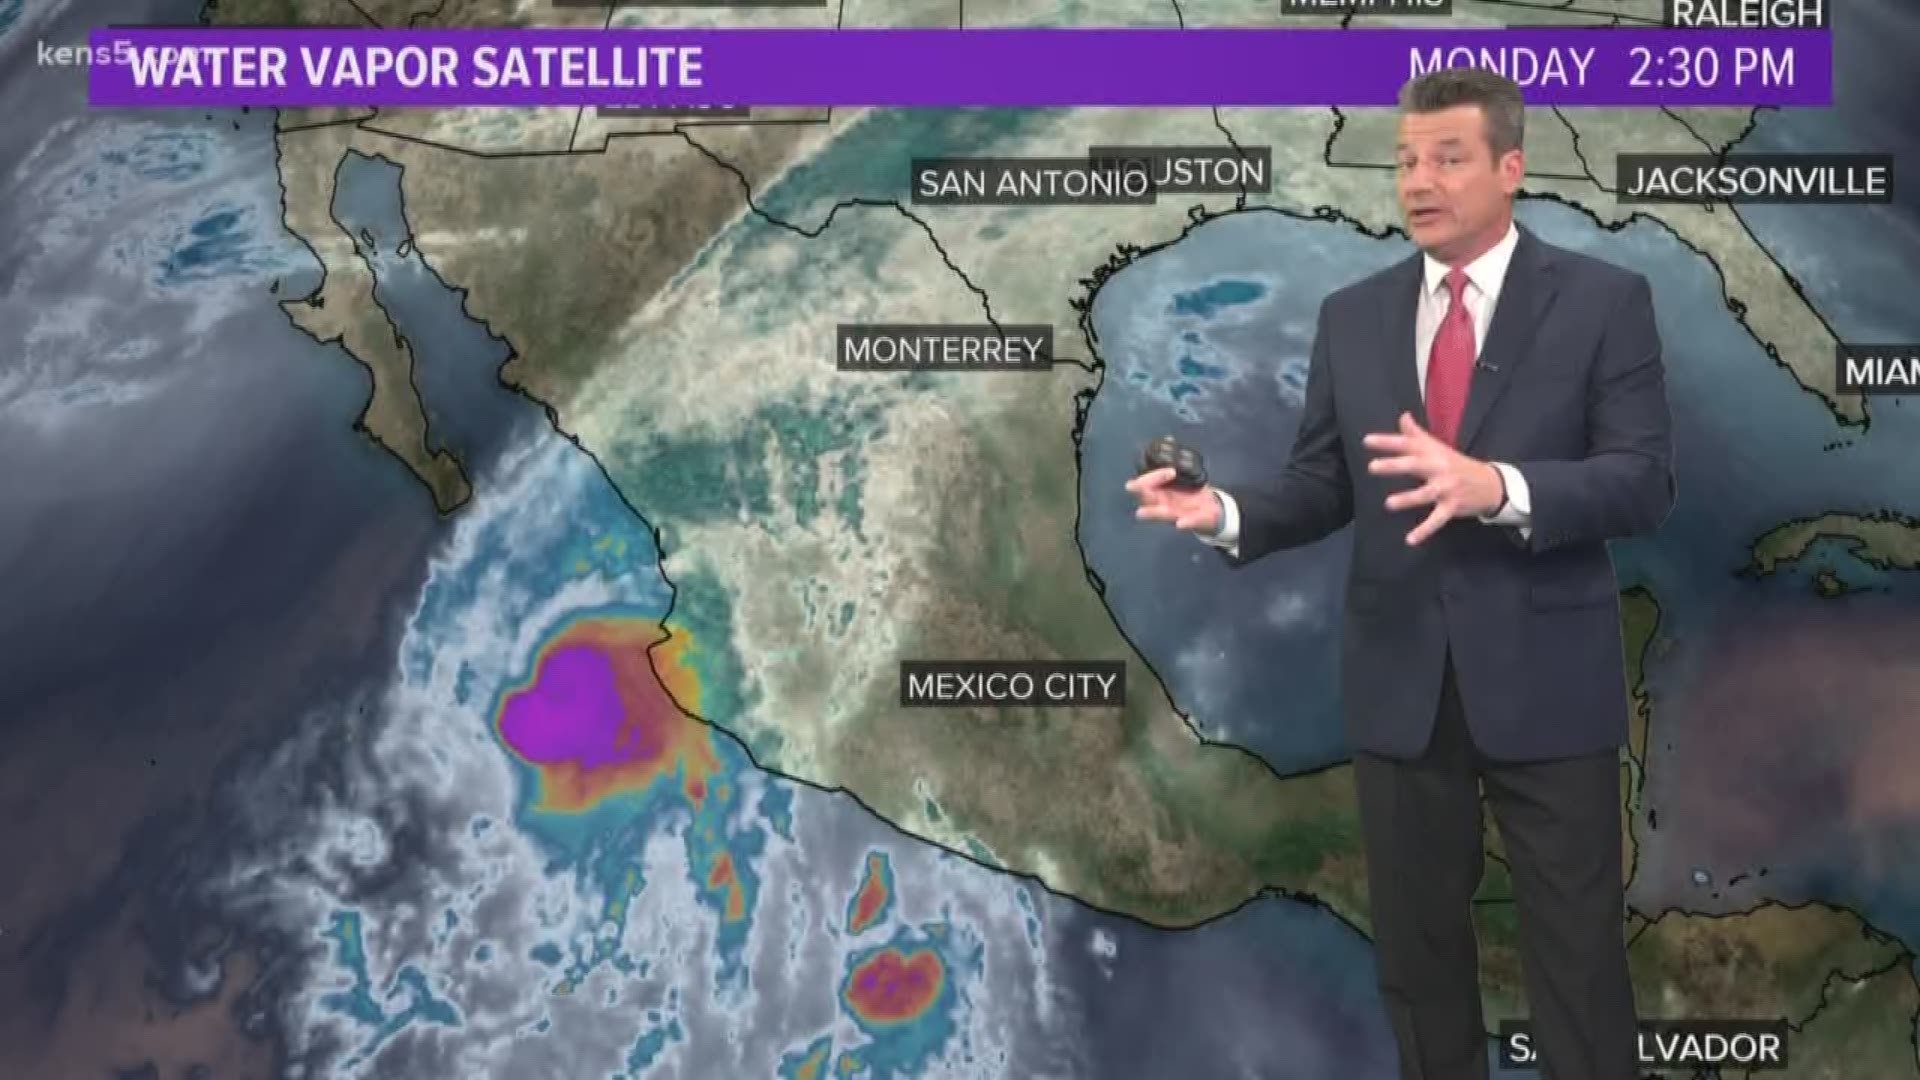 Remnants of Hurricane Willa to bring rainfall to south Texas